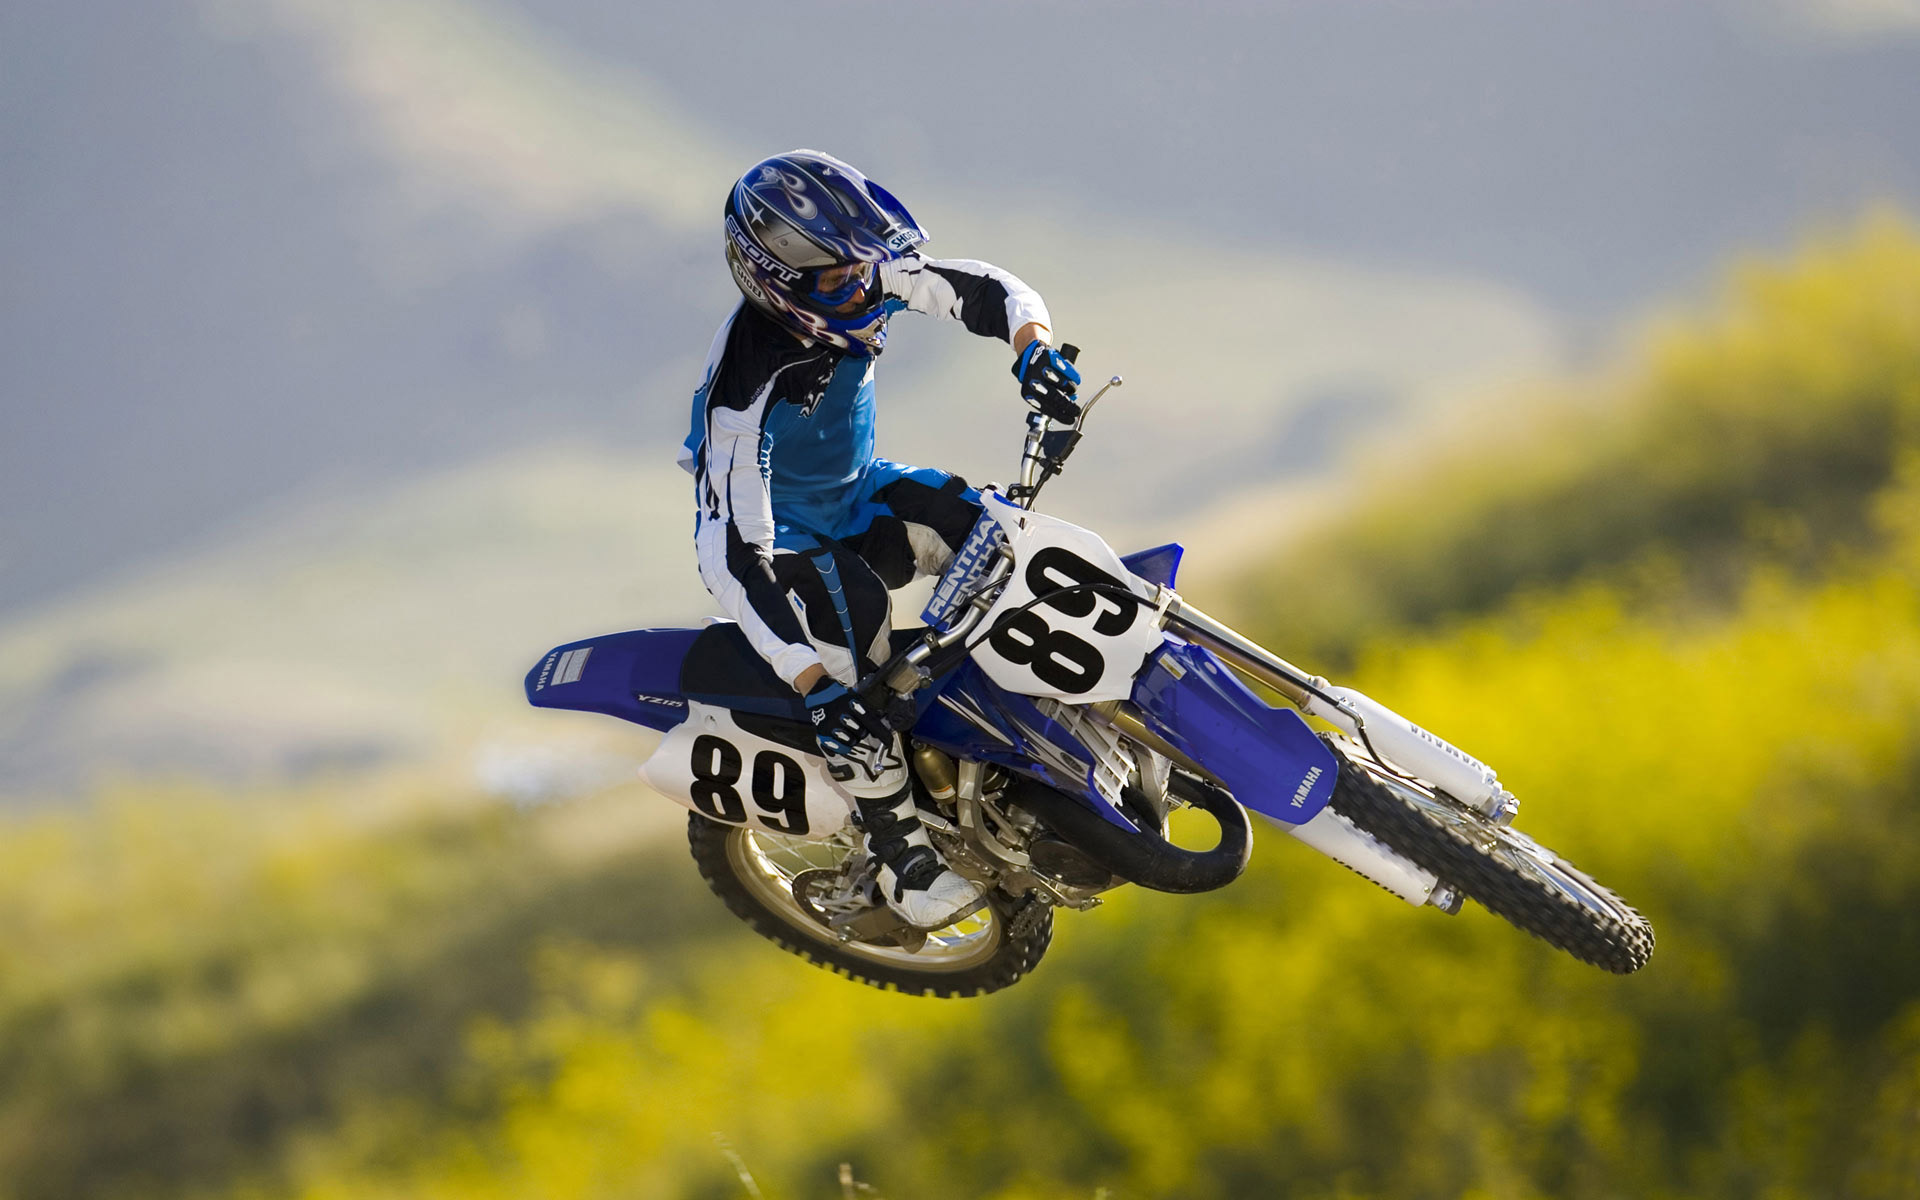 Supermoto: Dirt bike, Off-road competition bikes, The best riders, Unrivalled dual-sport ability. 1920x1200 HD Background.